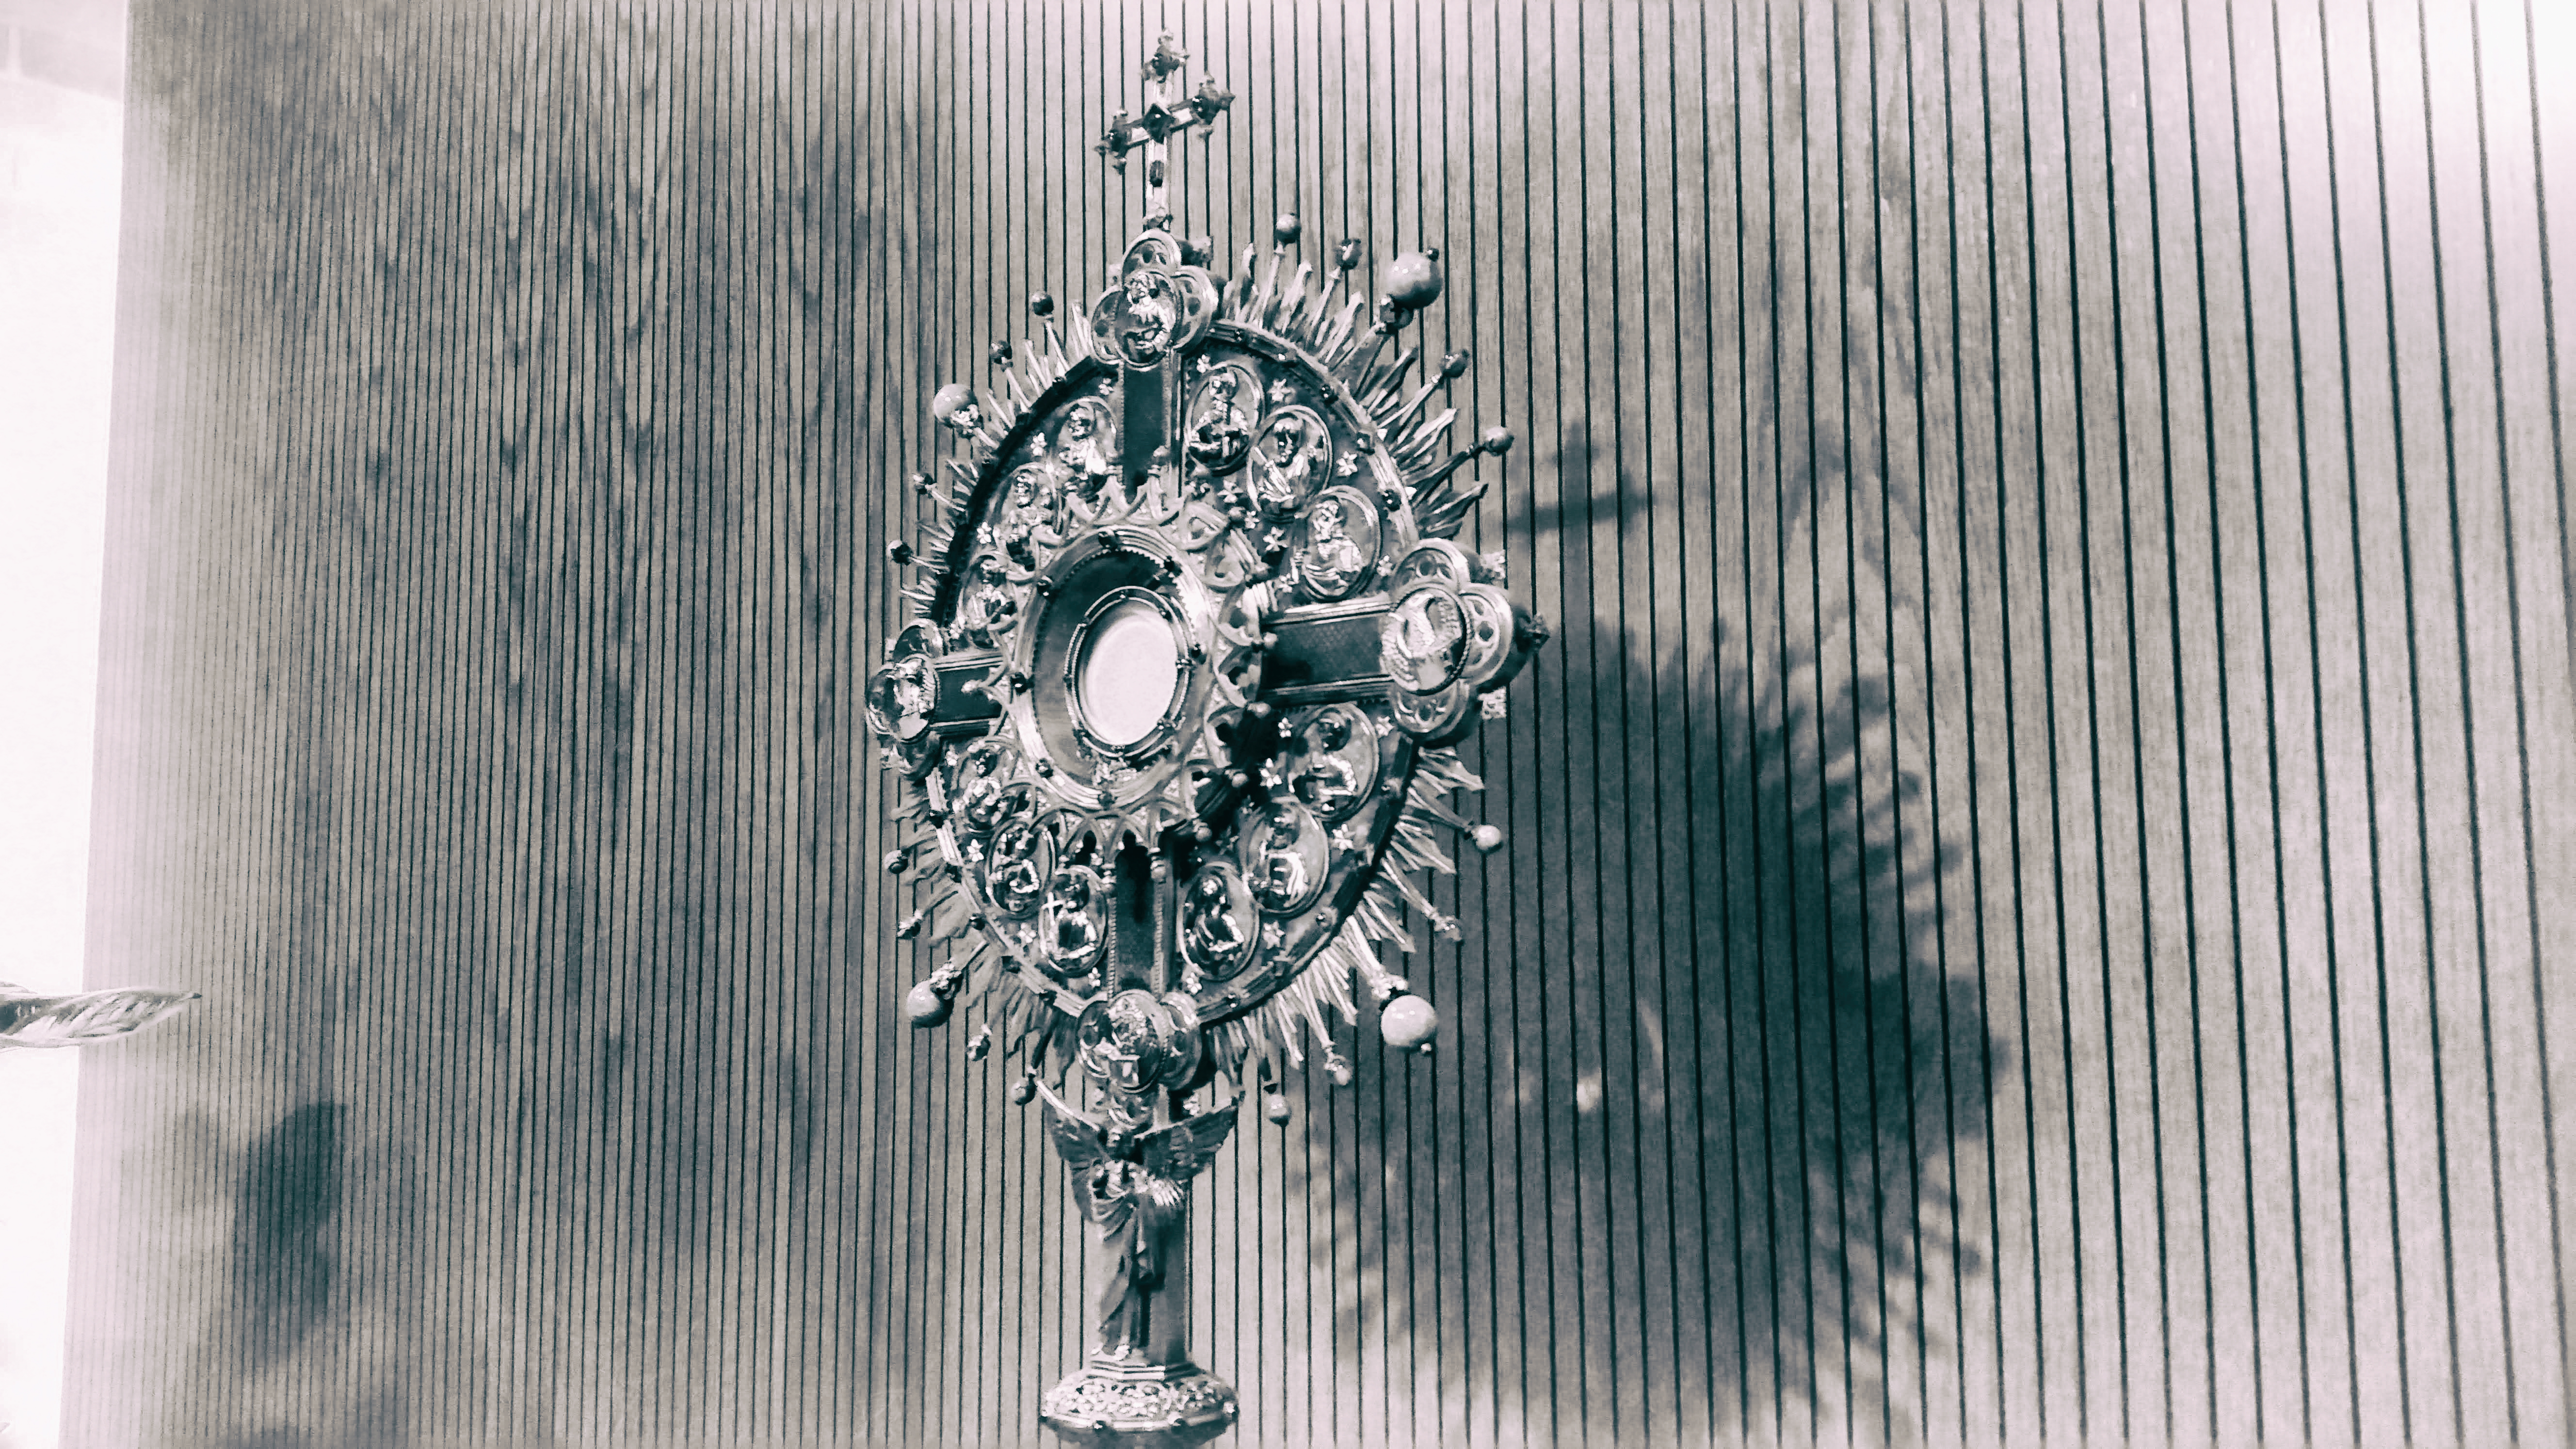 Pictorialism Image - Monstrance (2018)